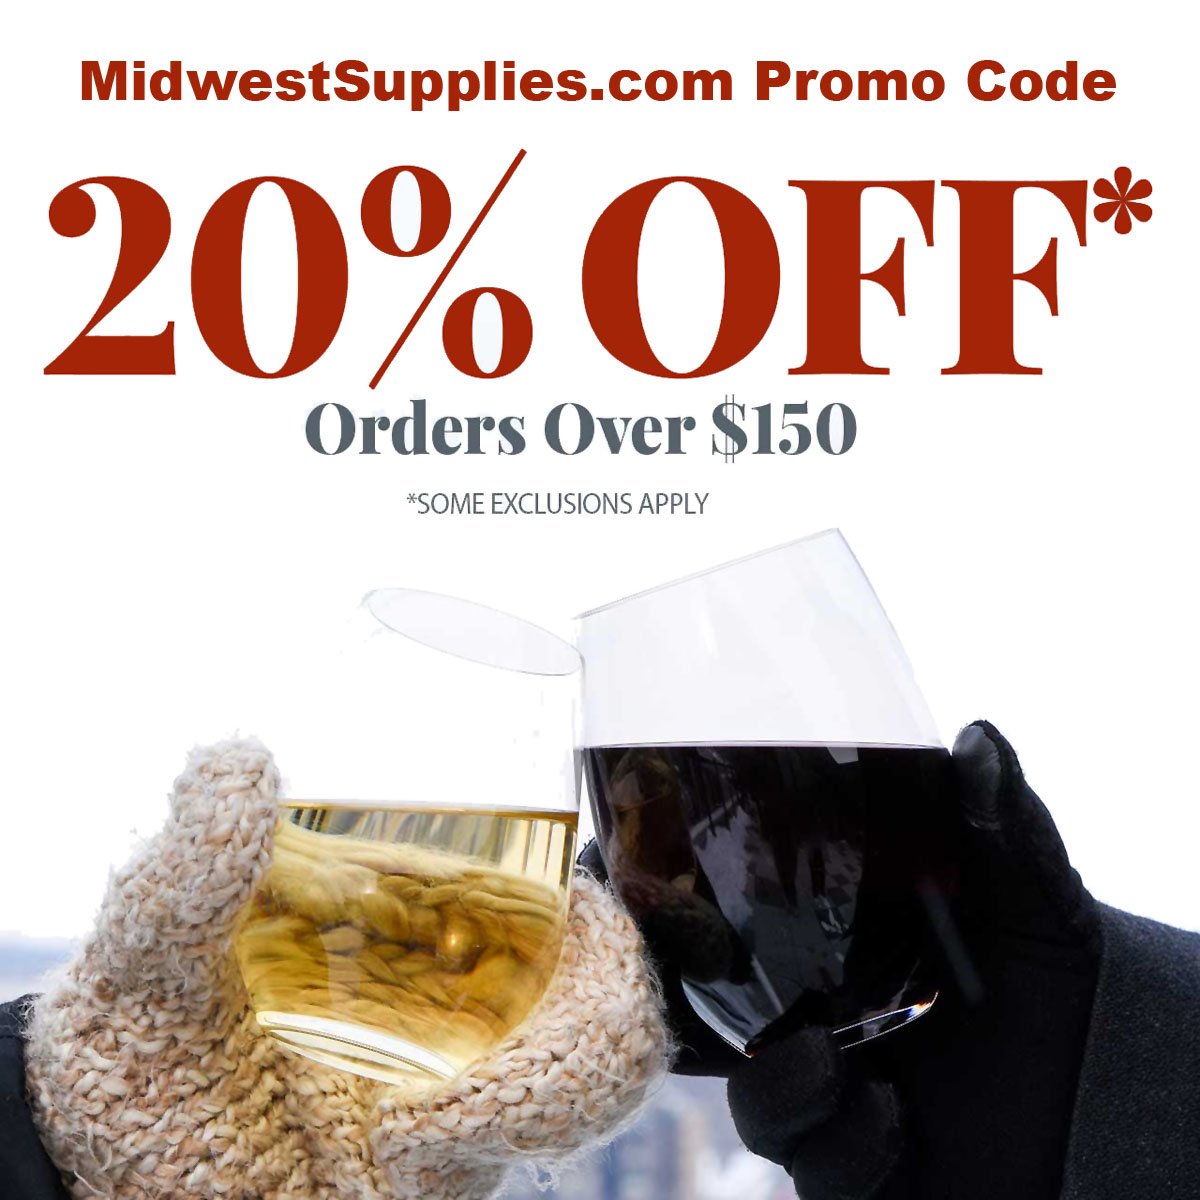 February 2020 Promo Codes for MidwestSupplies.com